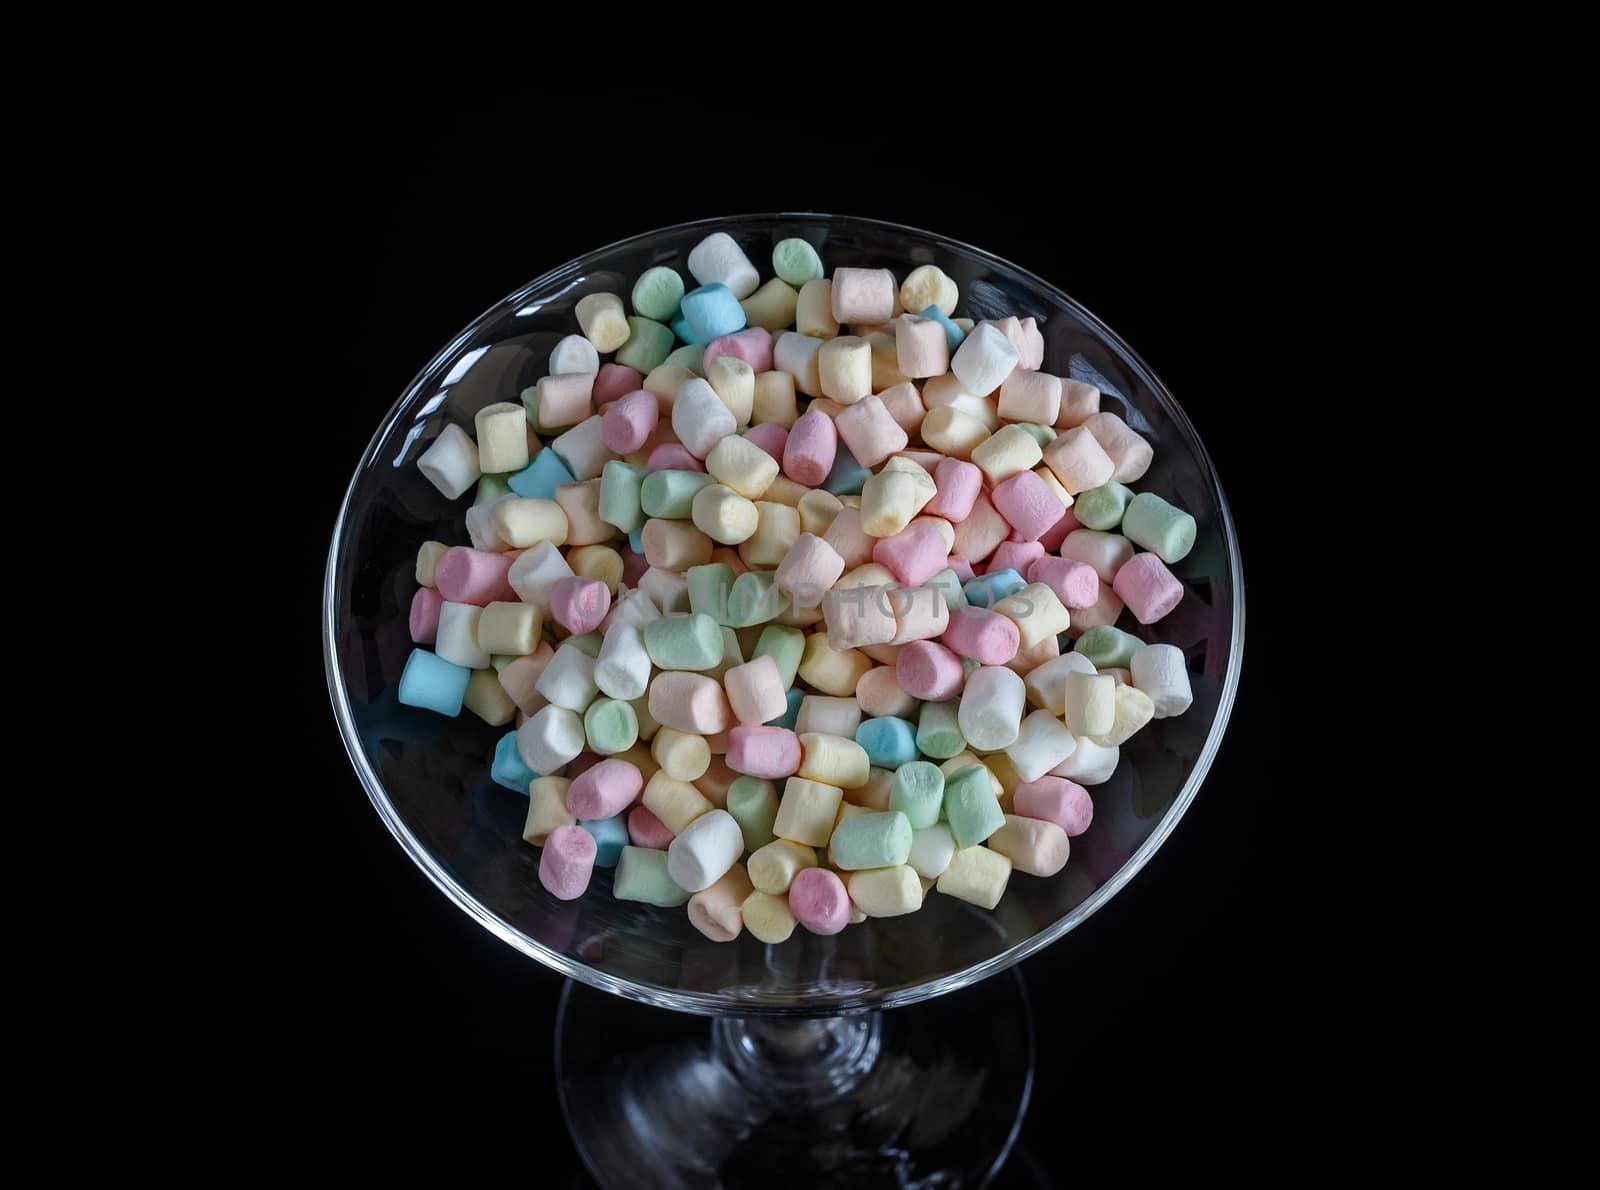 marshmallow in a vase on a dark background